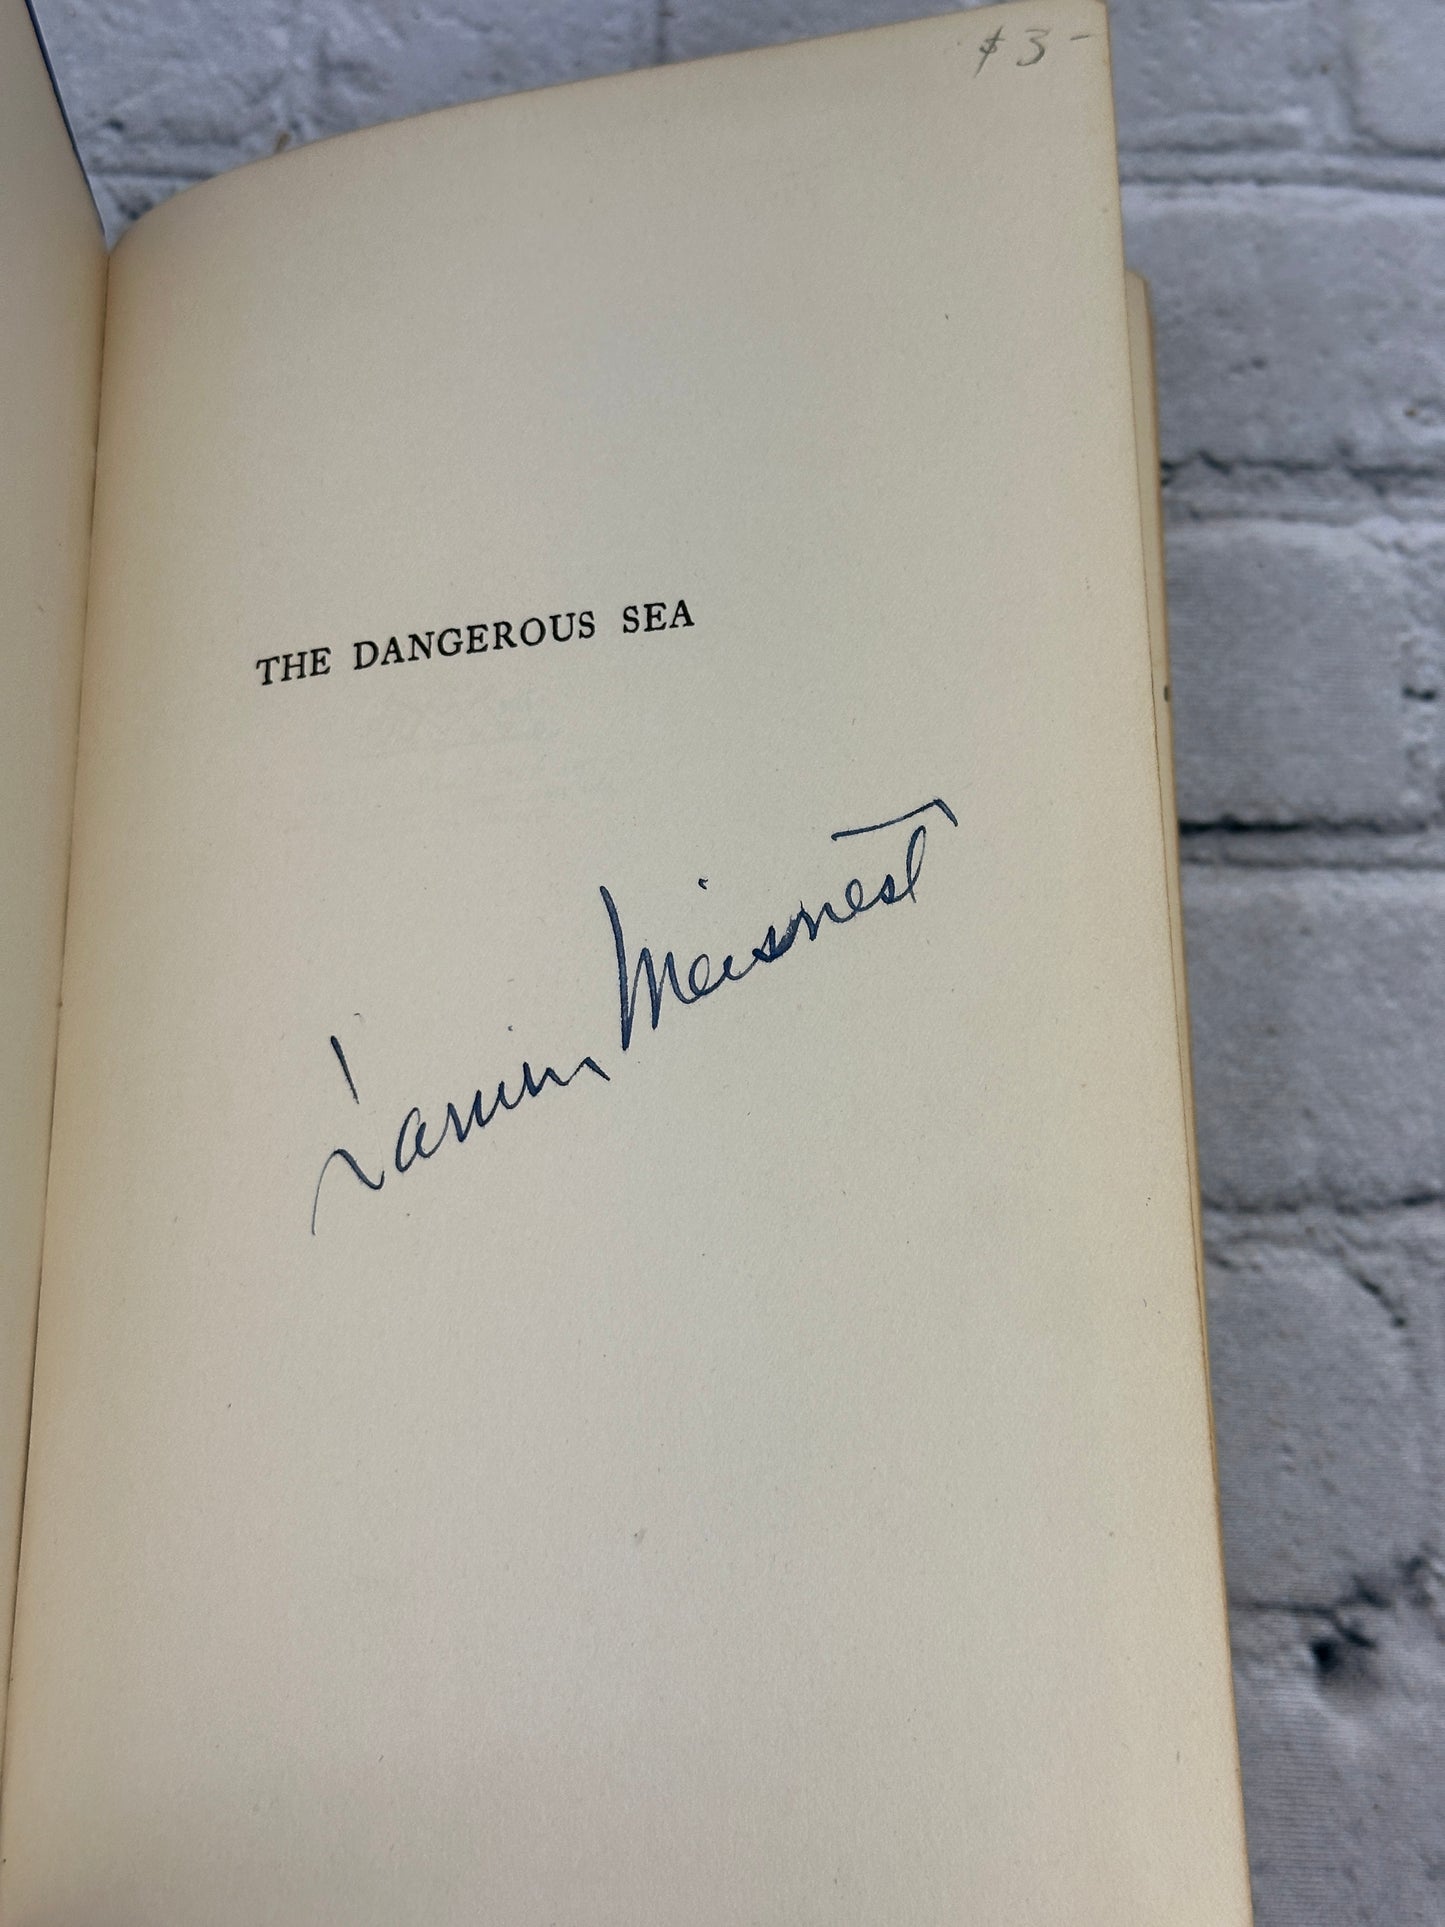 Dangerous Sea:The  Mediterranean & Its Future by George Slocombe [1937 · 1st Ed]